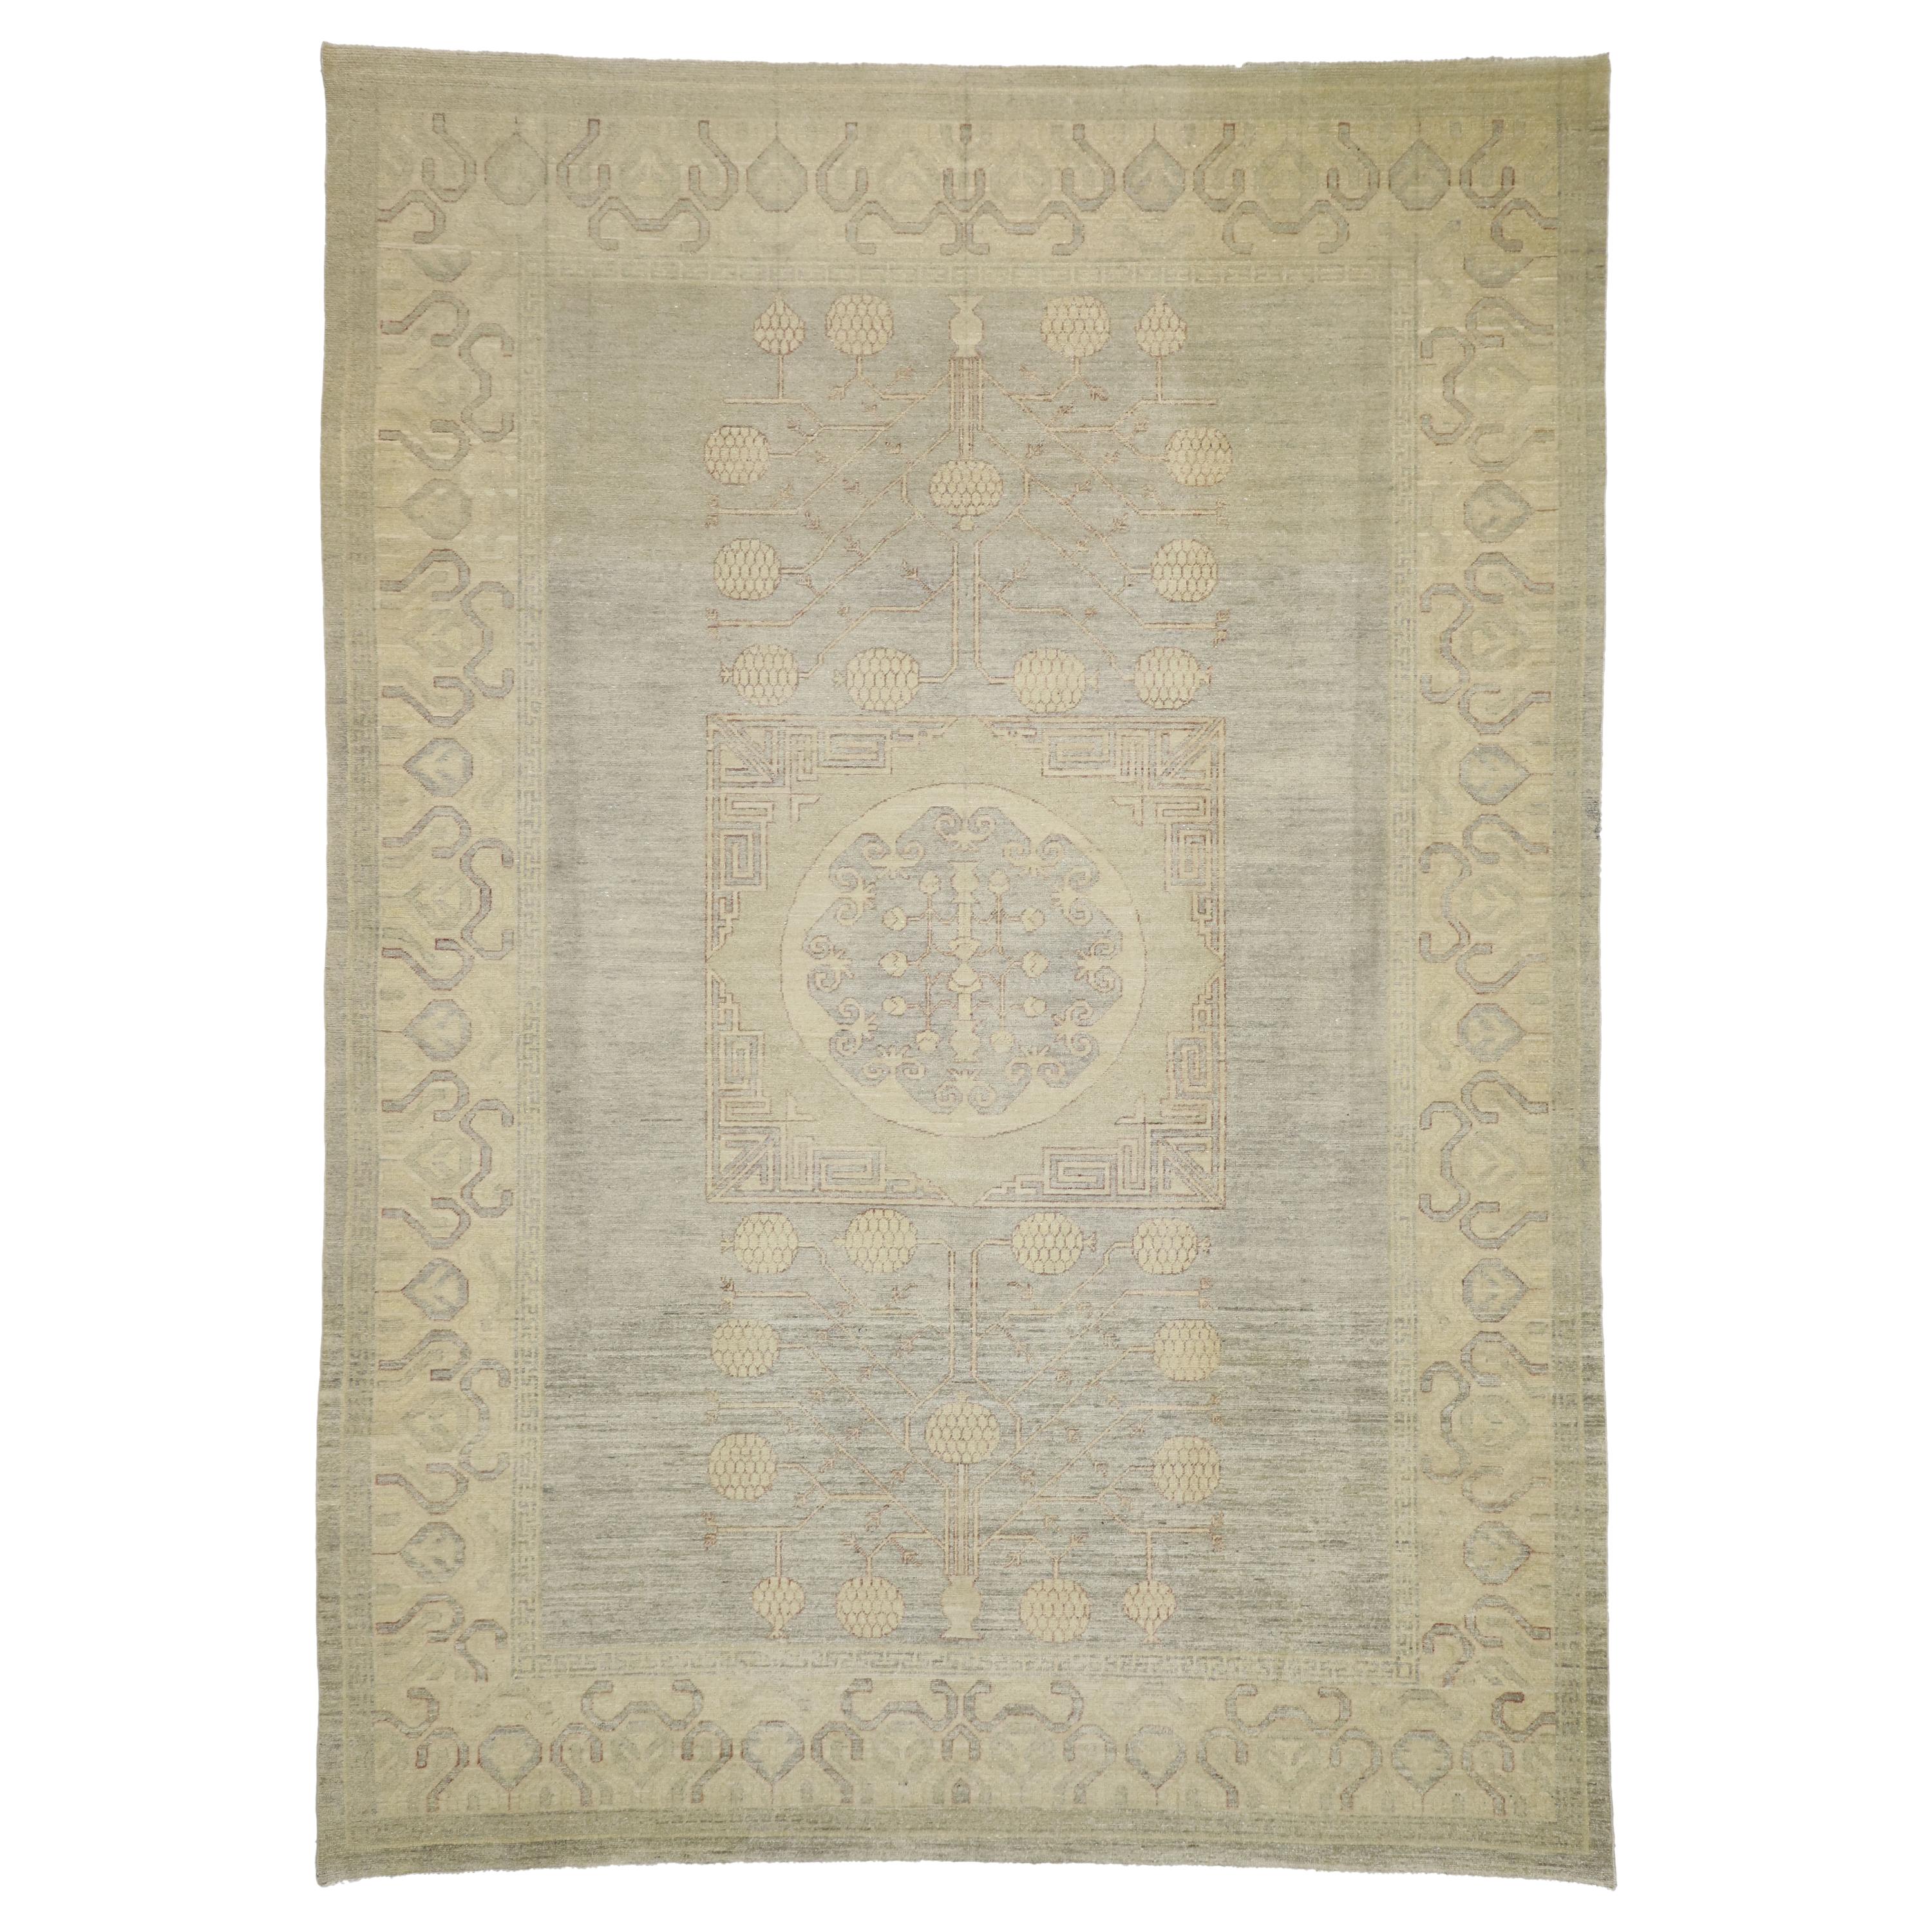 Transitional Khotan Style Area Rug with Pomegranate Design